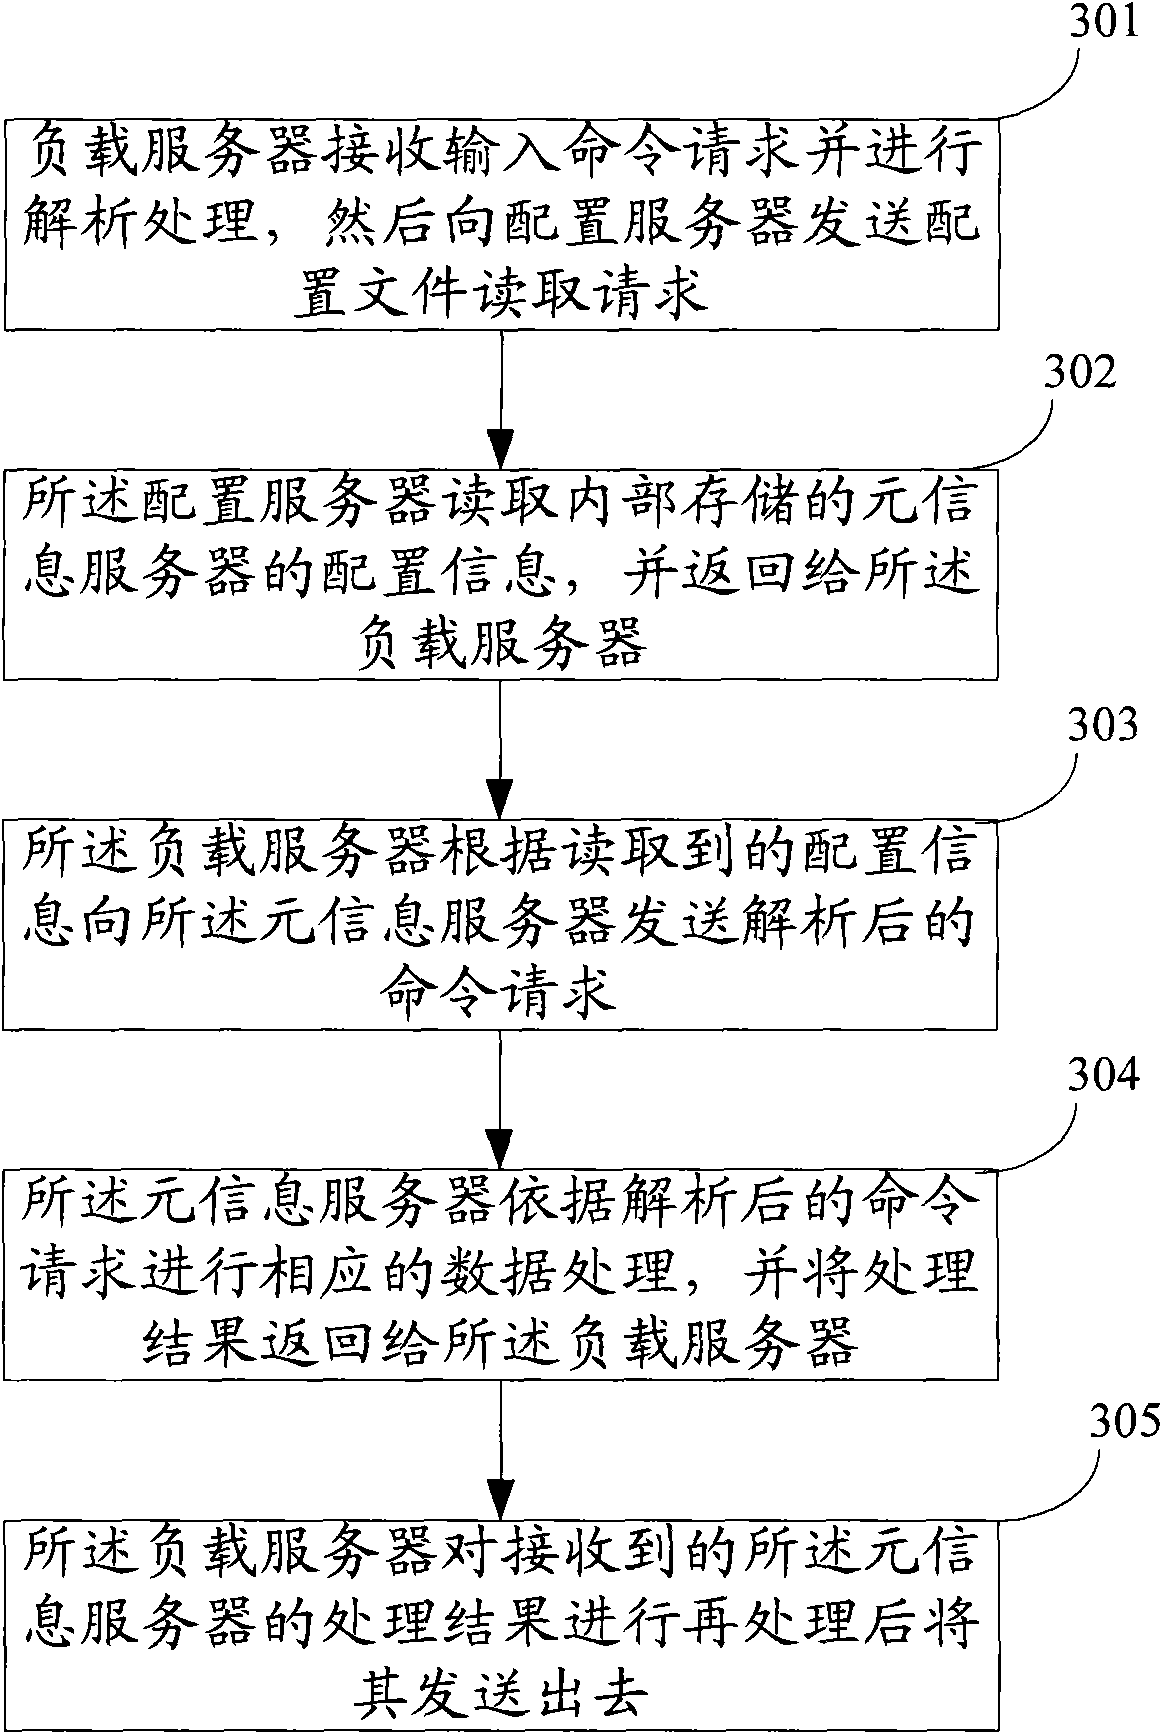 Extendable system structure-based distributed system and application method thereof